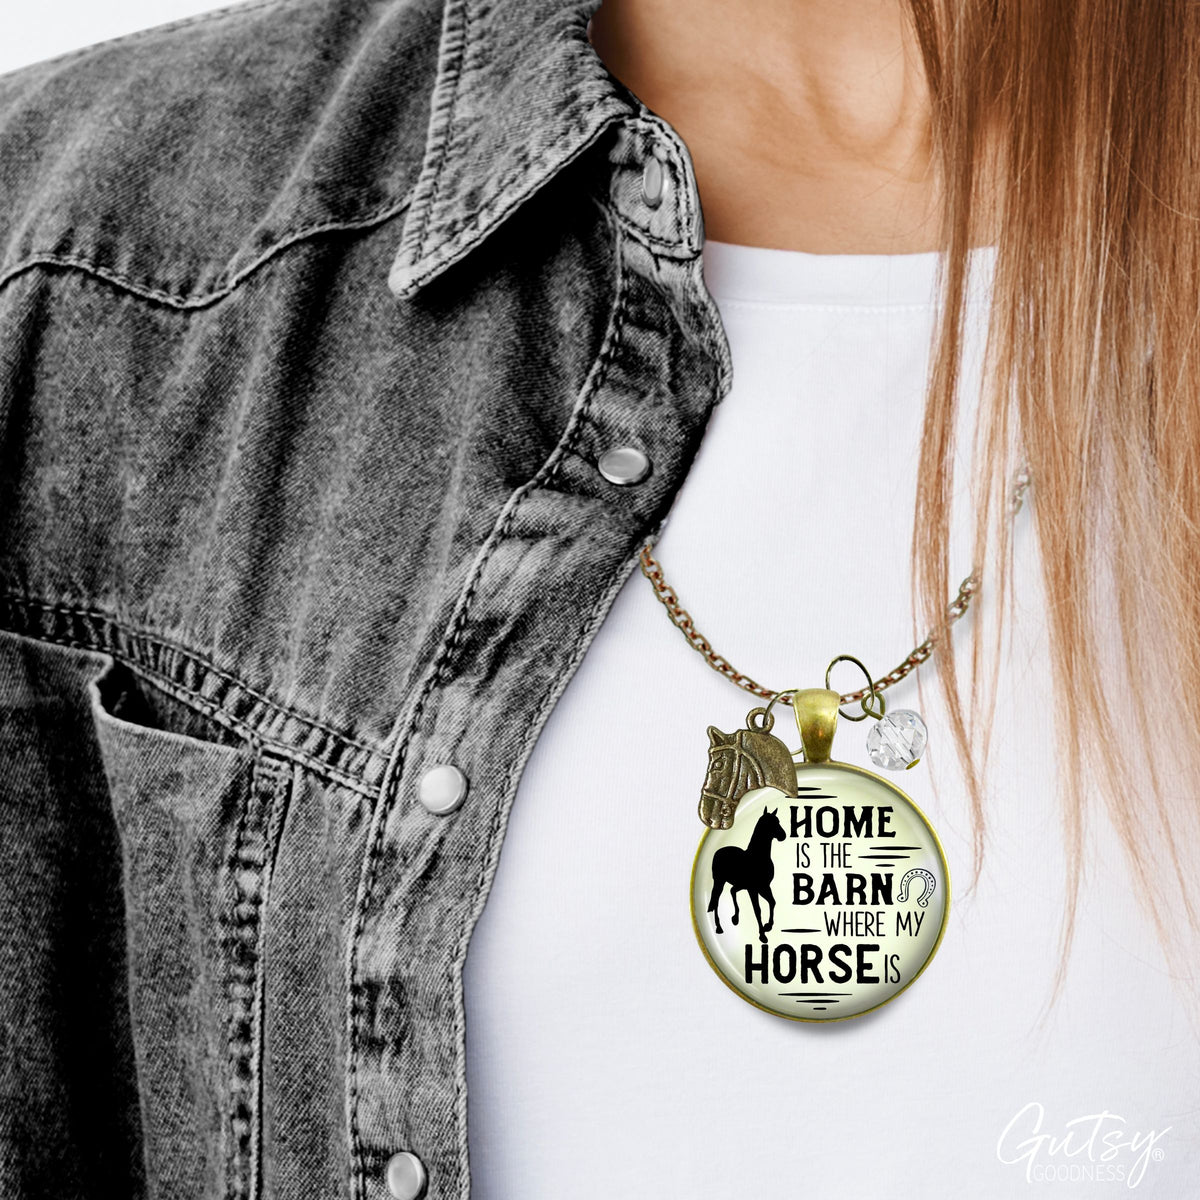 Handmade Gutsy Goodness Jewelry Home Is The Barn Where My Horse Is Necklace Western Boho Country Girl Charm Jewelry & Message Card